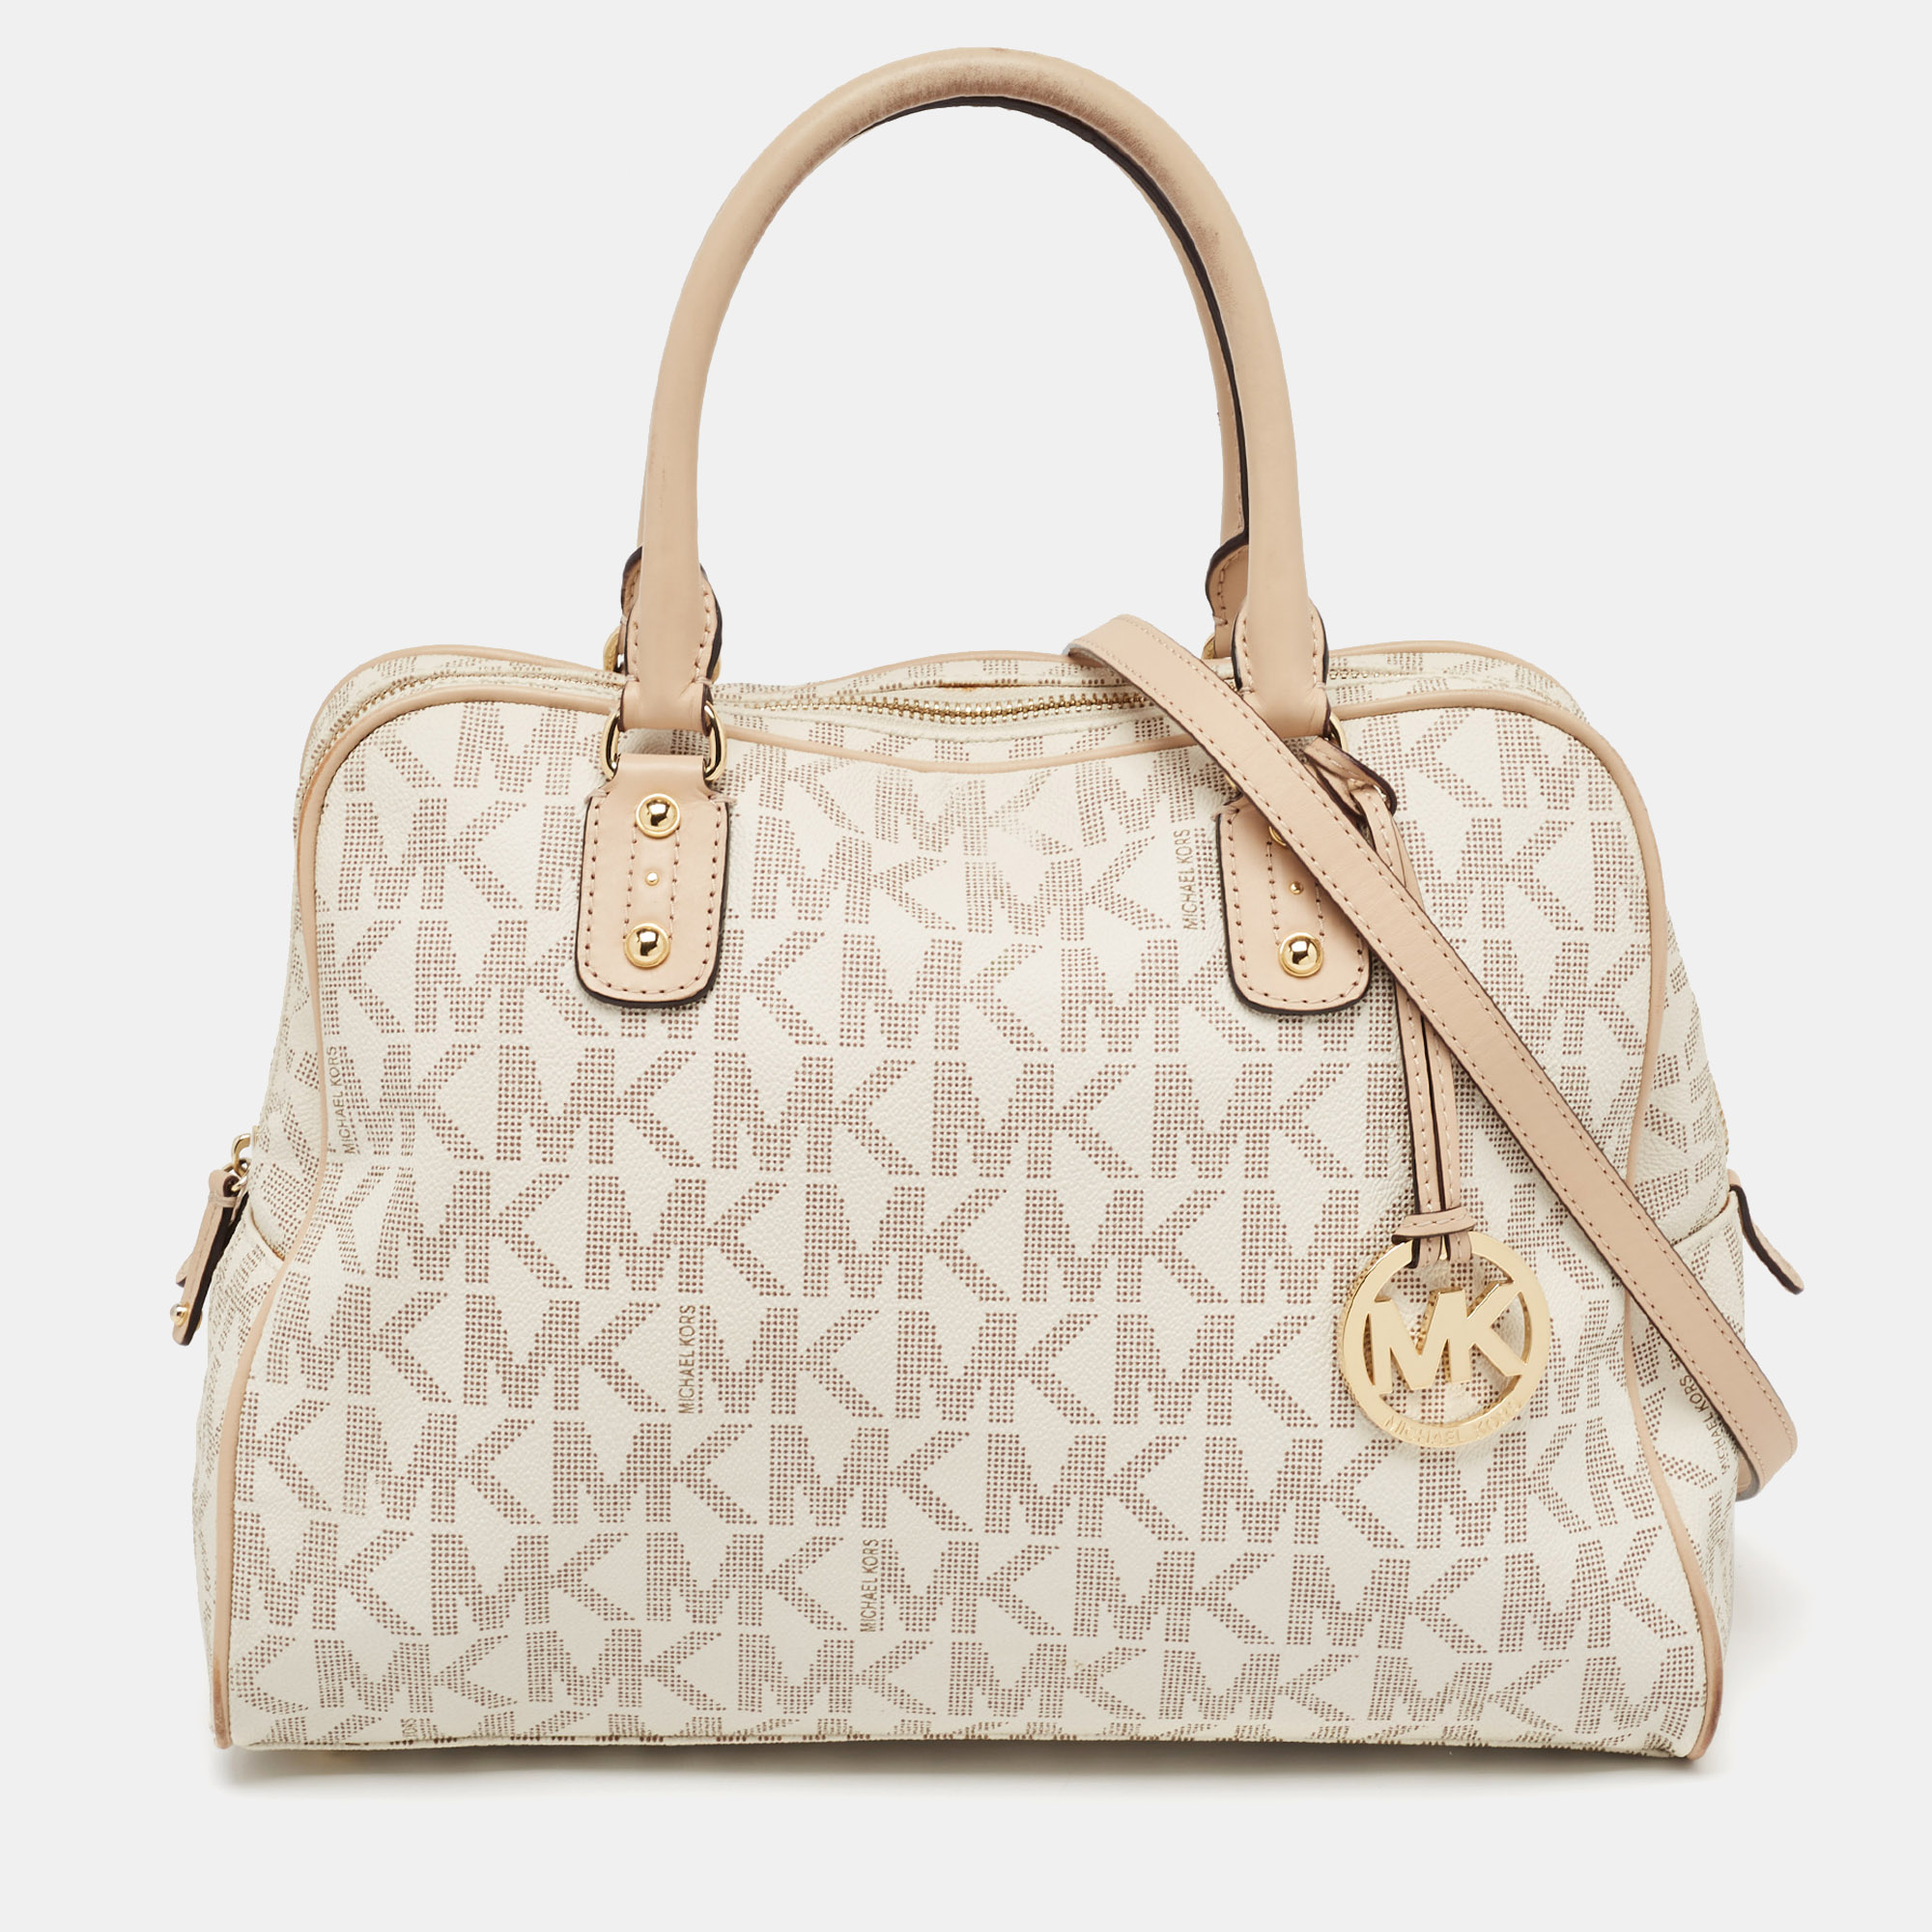 Michael kors beige/white signature coated canvas and leather charm satchel